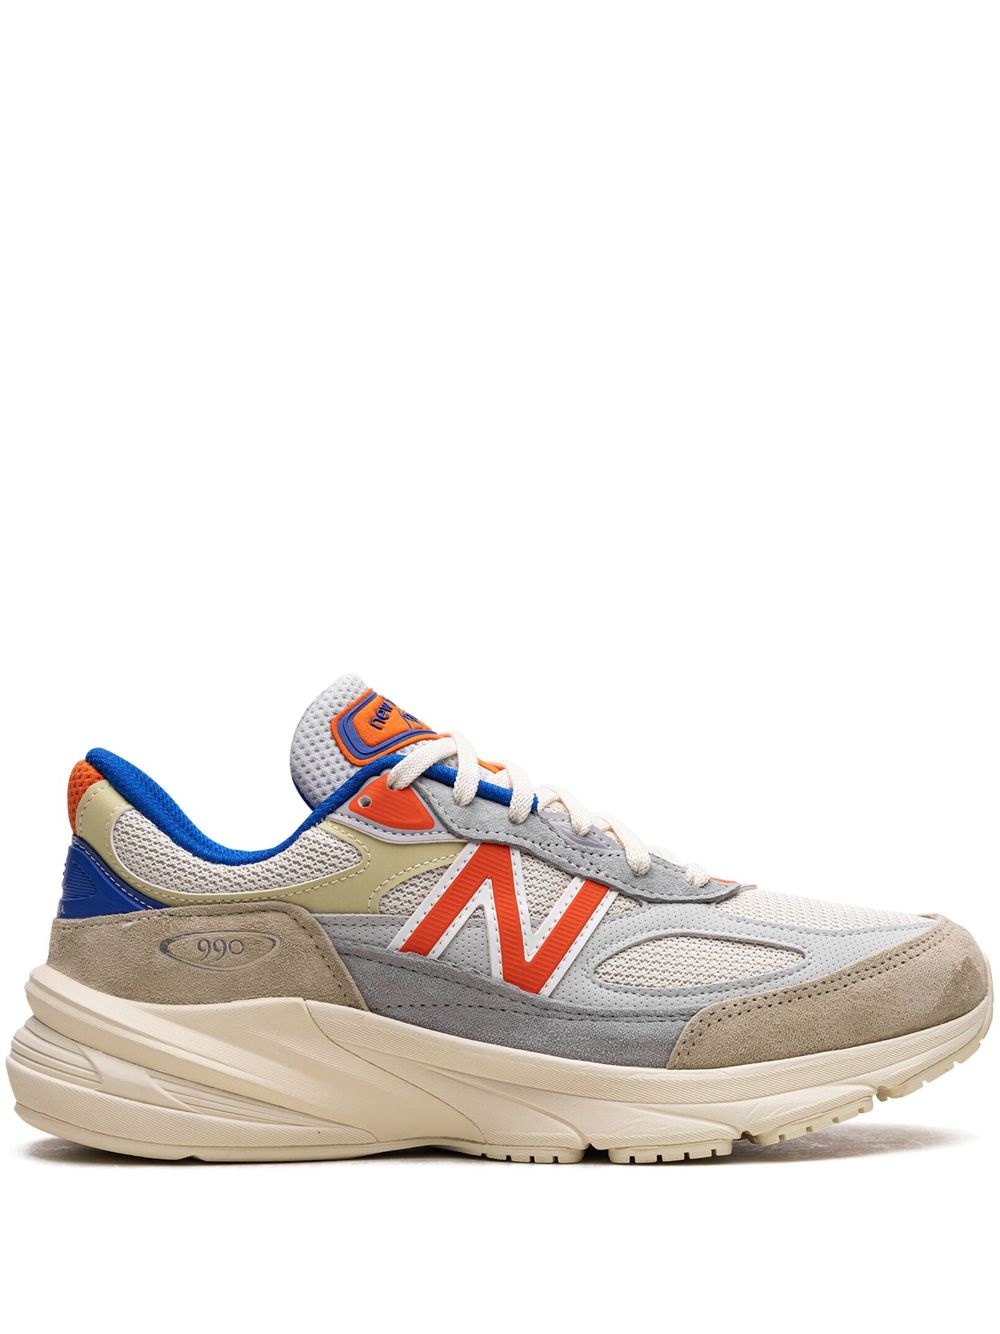 New Balance x Kith 990 V6 "MSG Pack" sneakers - Beige